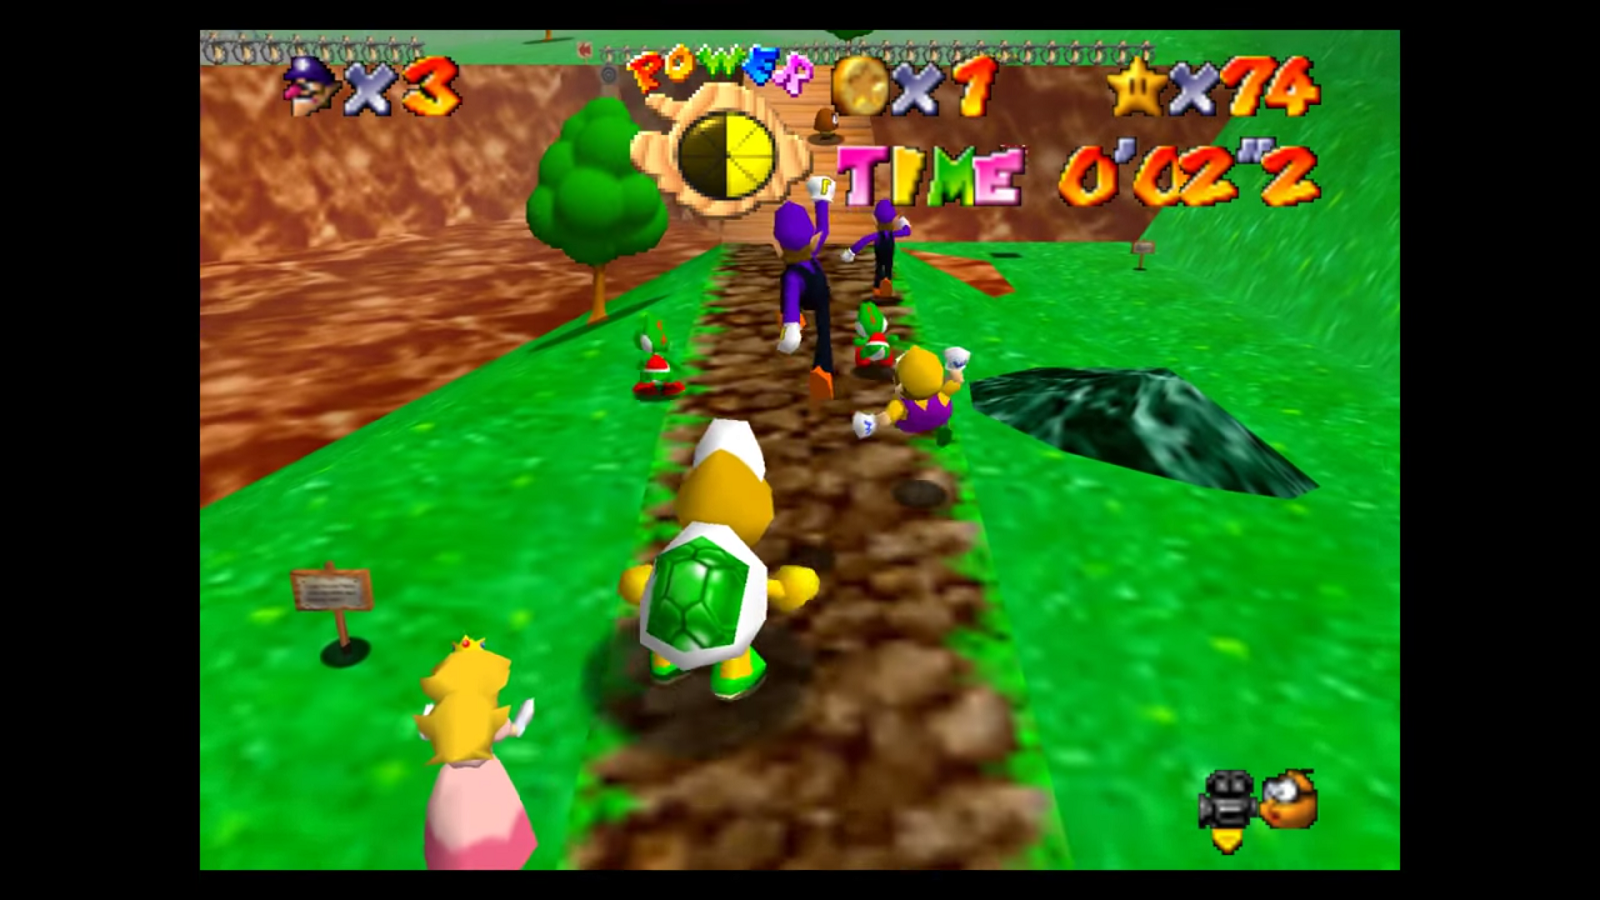 how to play super mario 64 multiplayer online